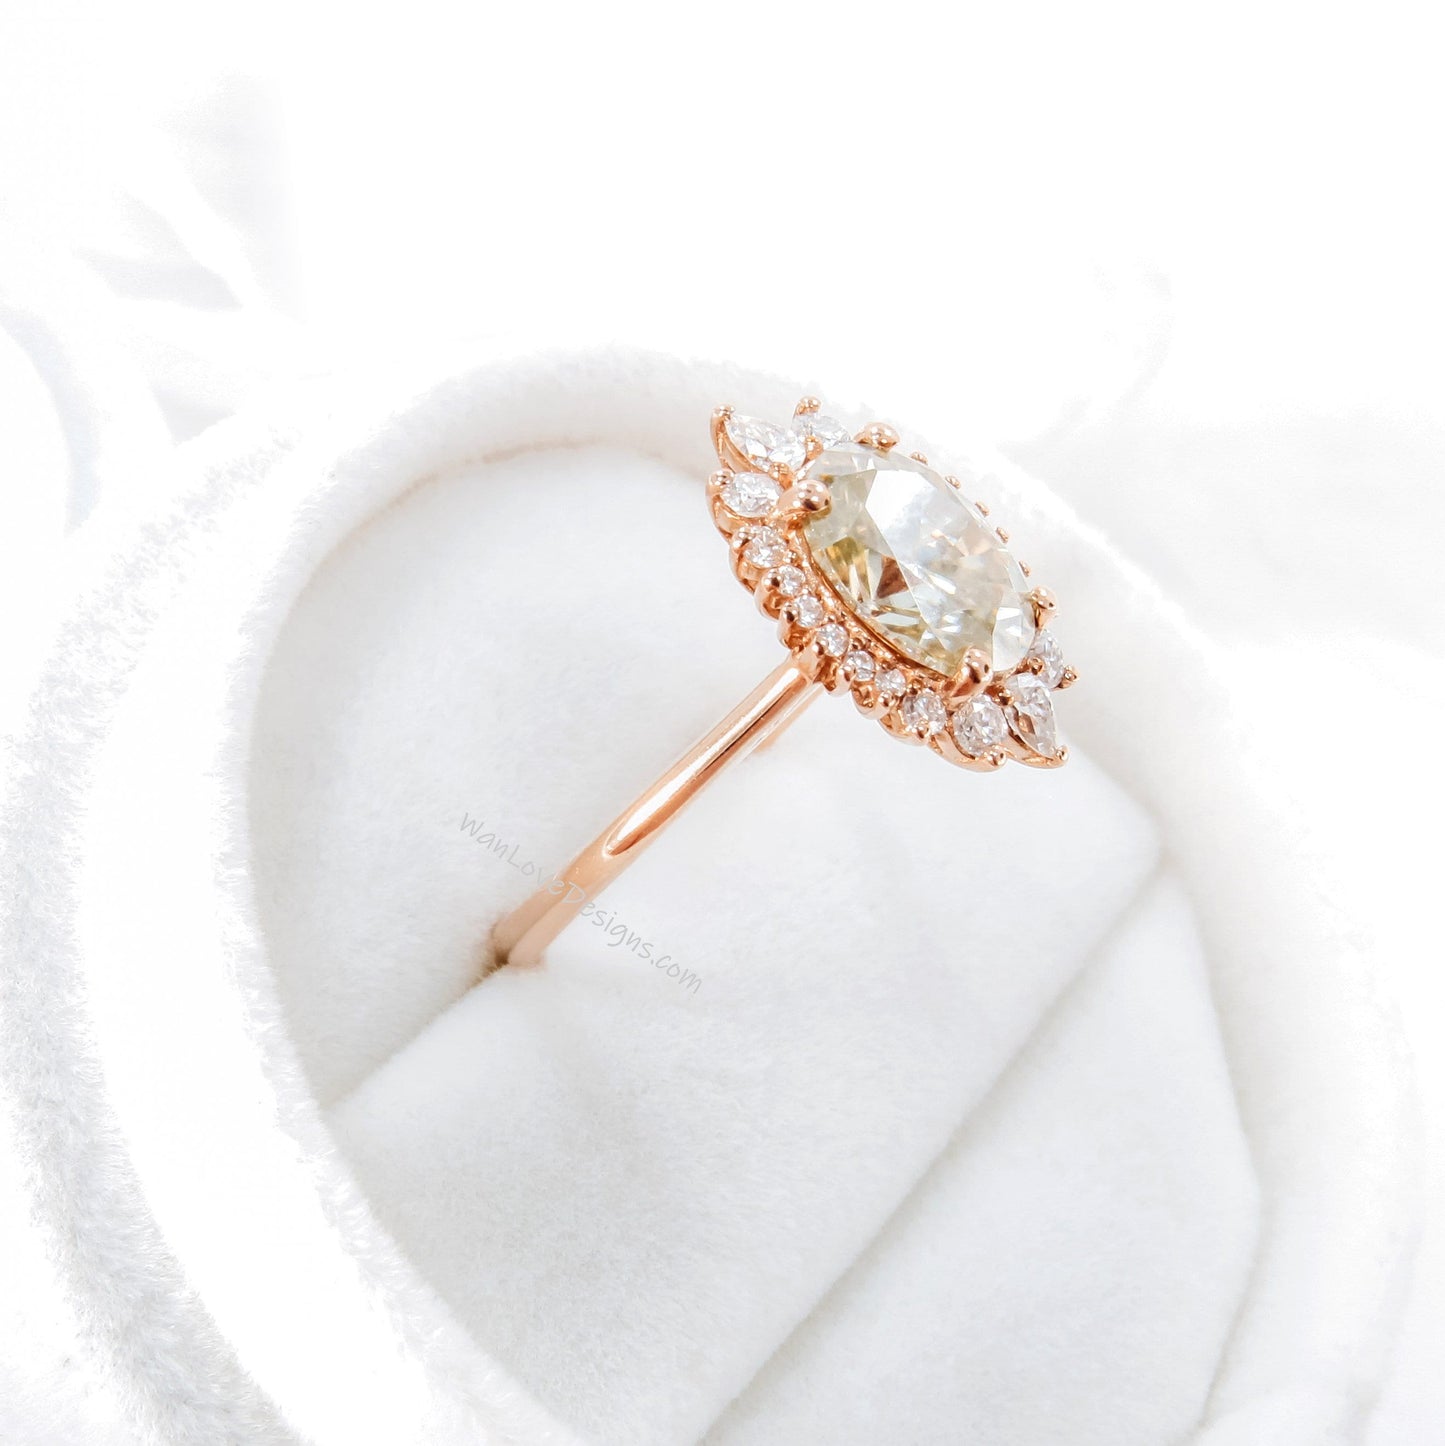 Halo Oval White Sapphire Engagement Ring, Halo Oval Moissanite Engagement Ring, Rose Gold Oval Cluster floral Ring, Anniversary Diamond Ring Wan Love Designs